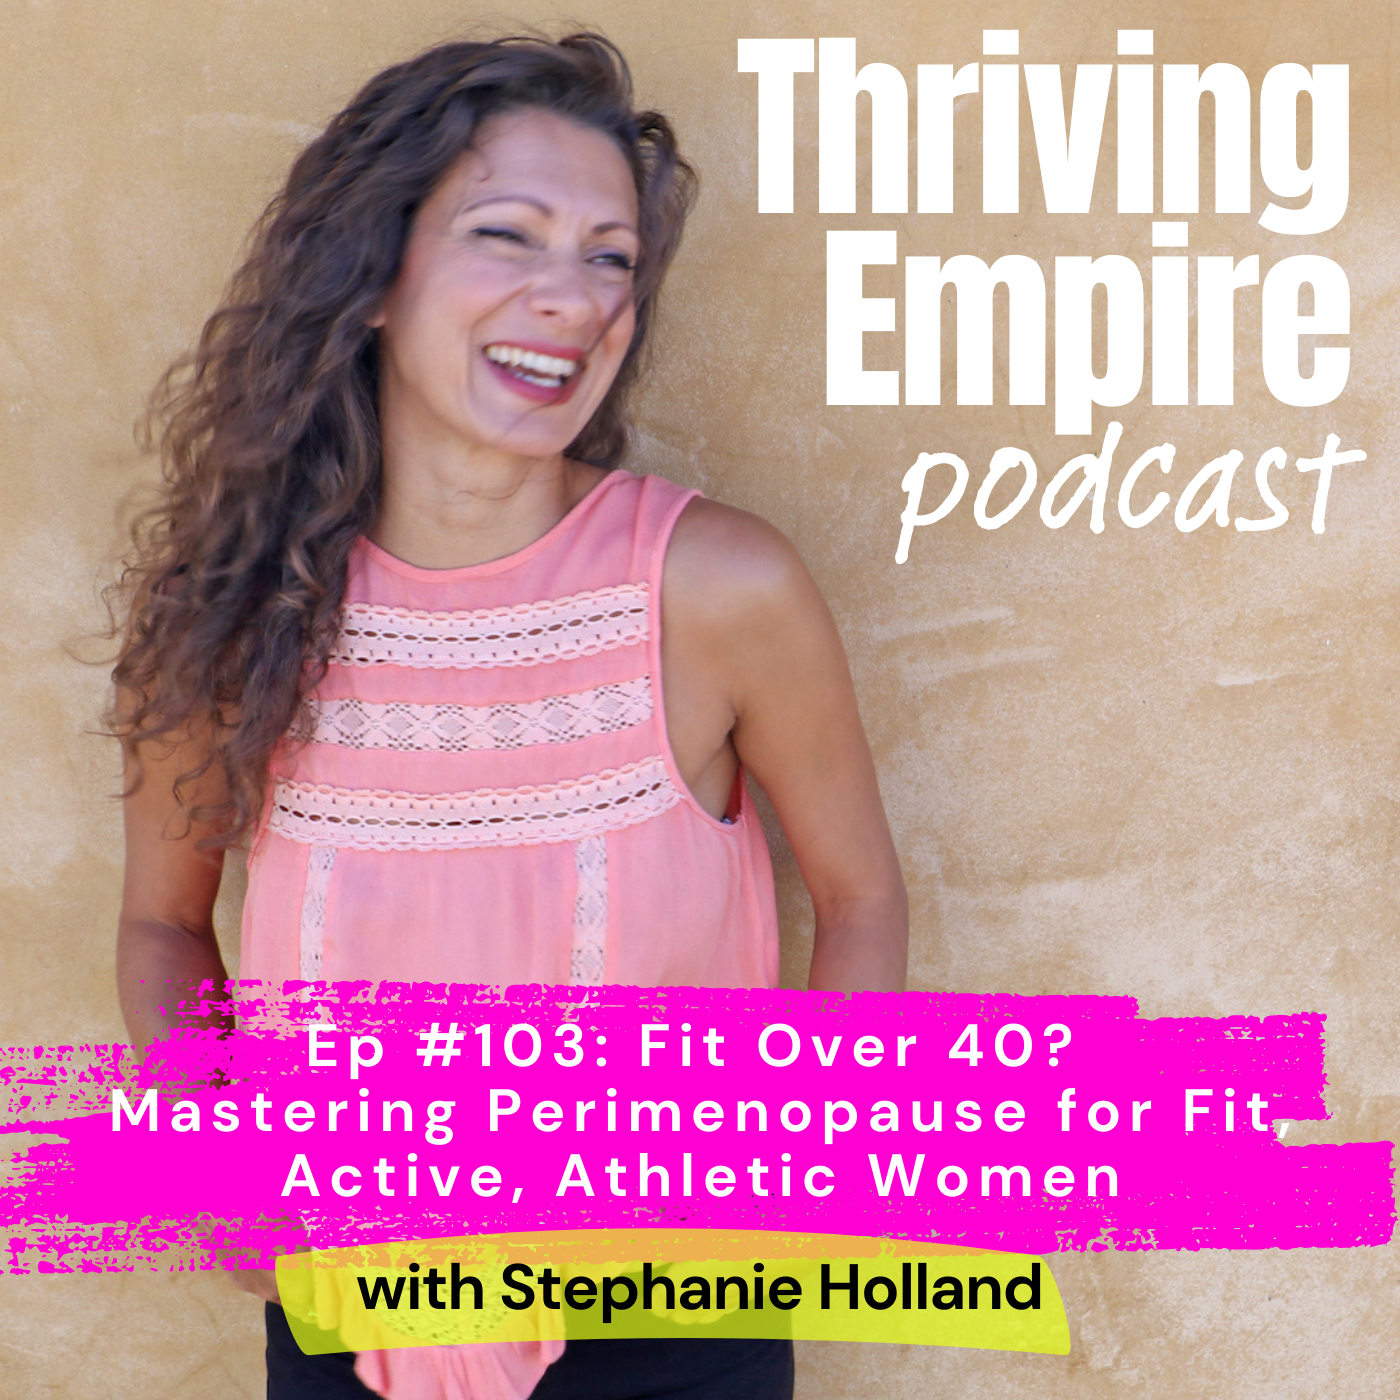 Ep #103: Fit Over 40? Mastering Perimenopause for Fit, Active, Athletic Women